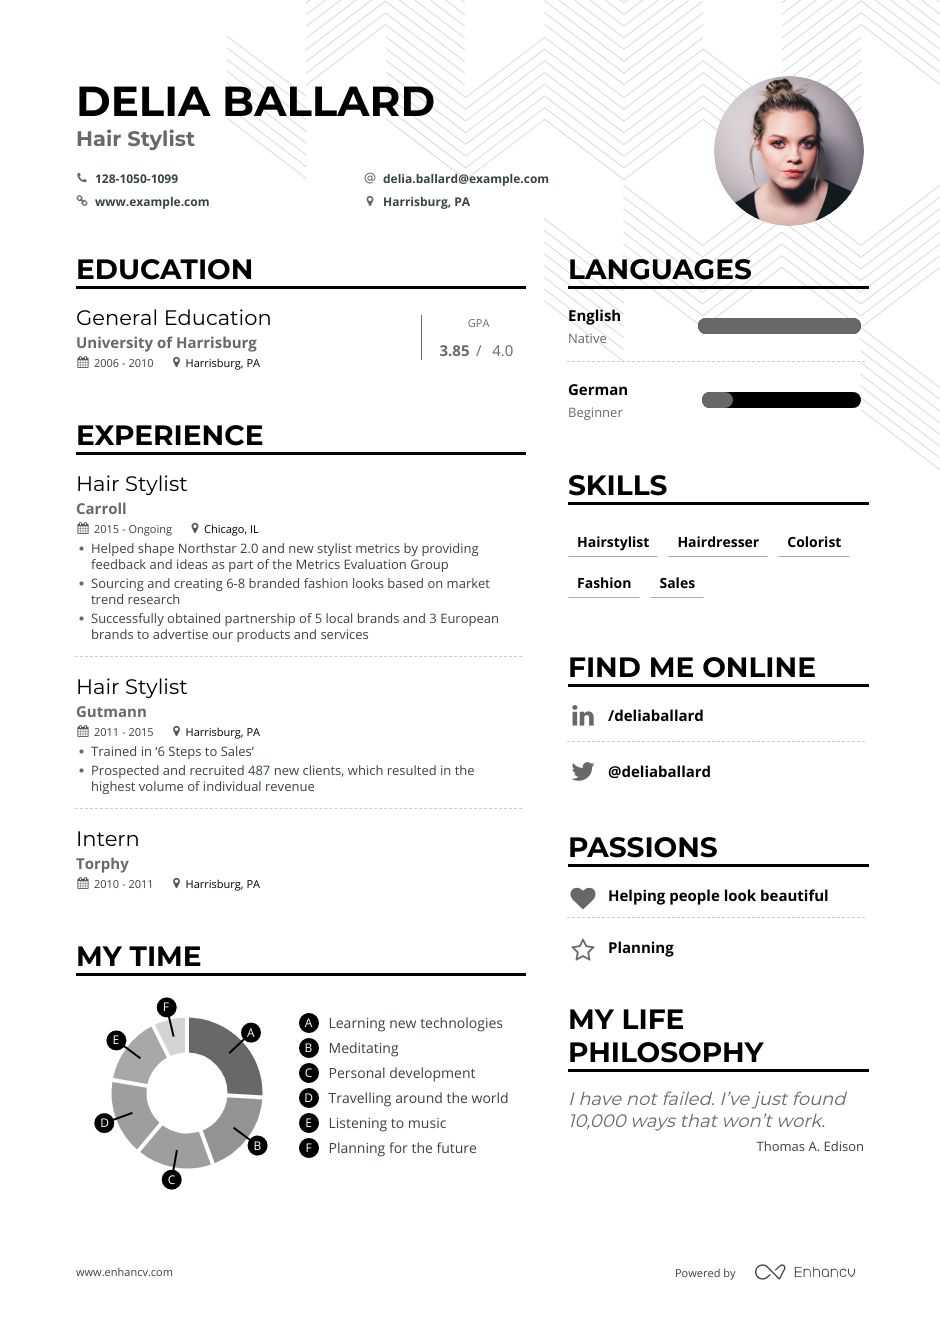 Hair Stylist Cover Letter Examples from enhancv.com